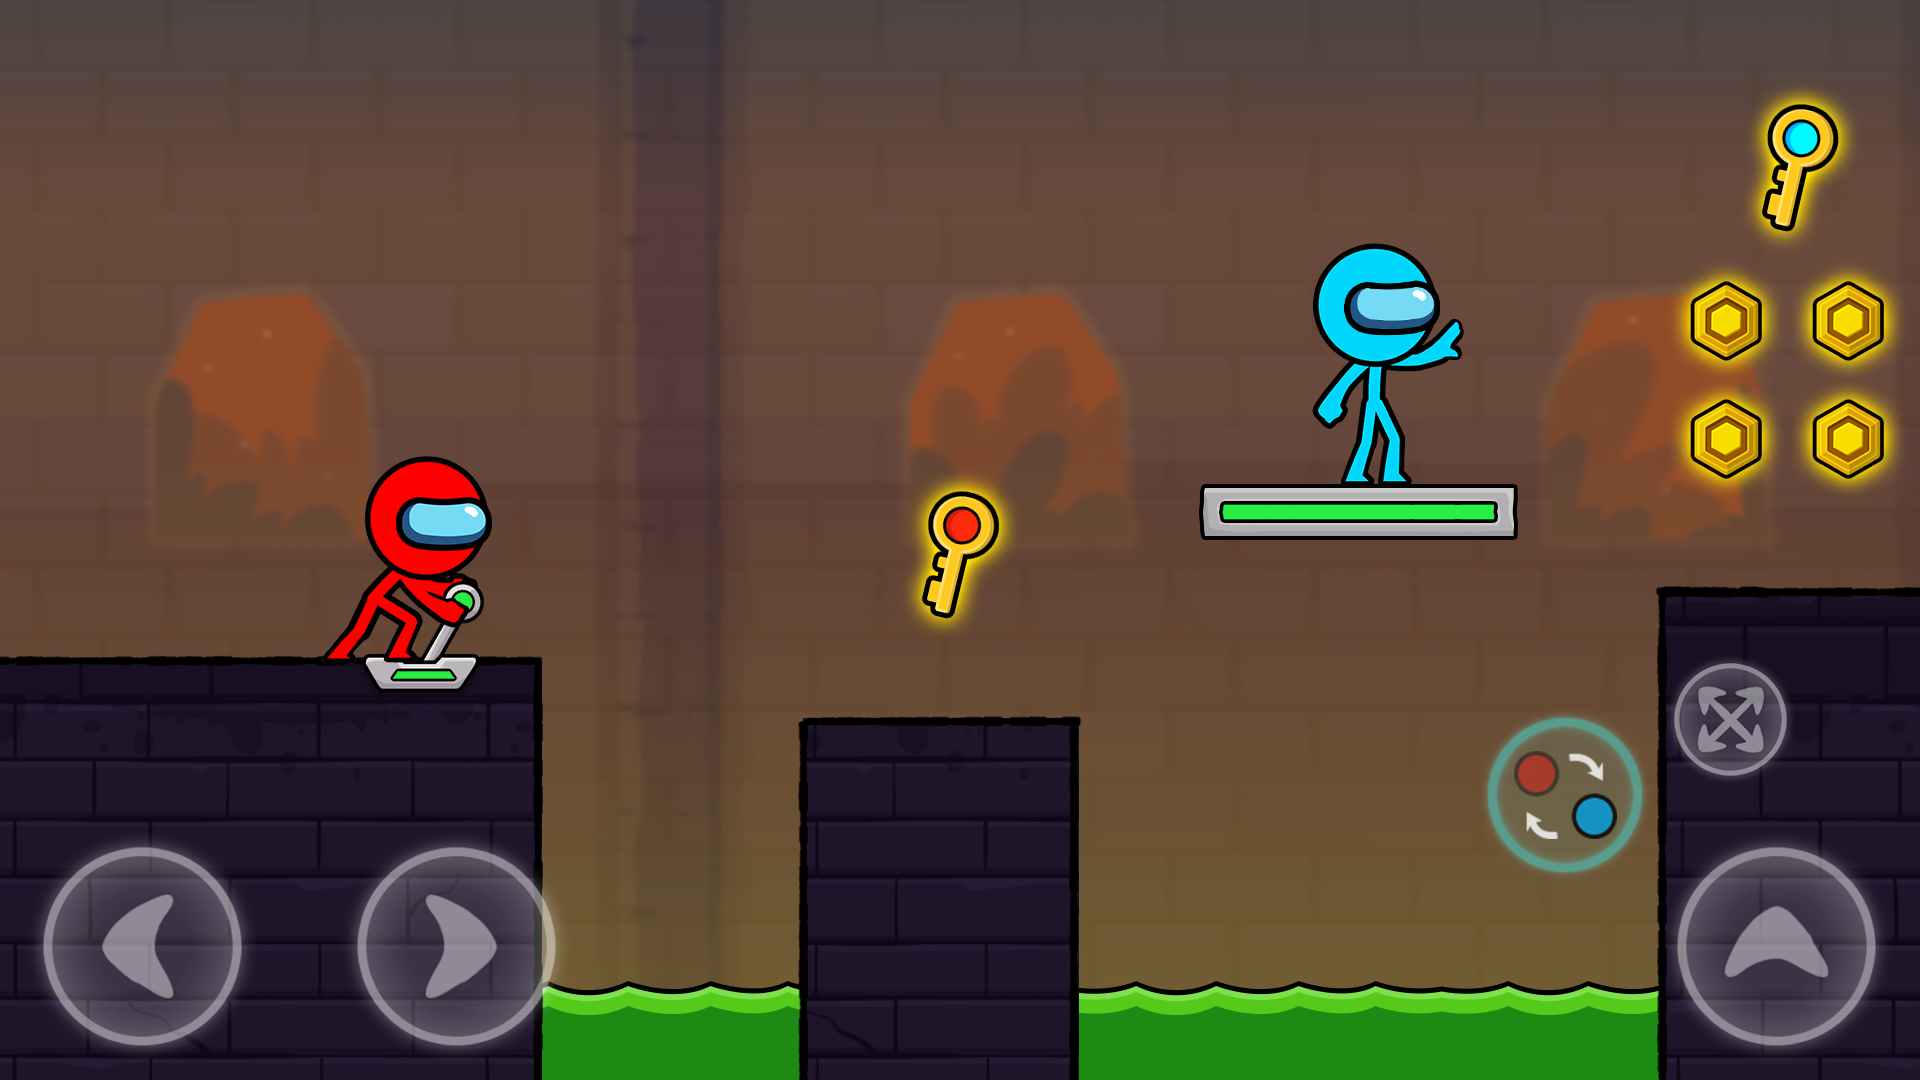 Download Red and Blue Stickman 2 